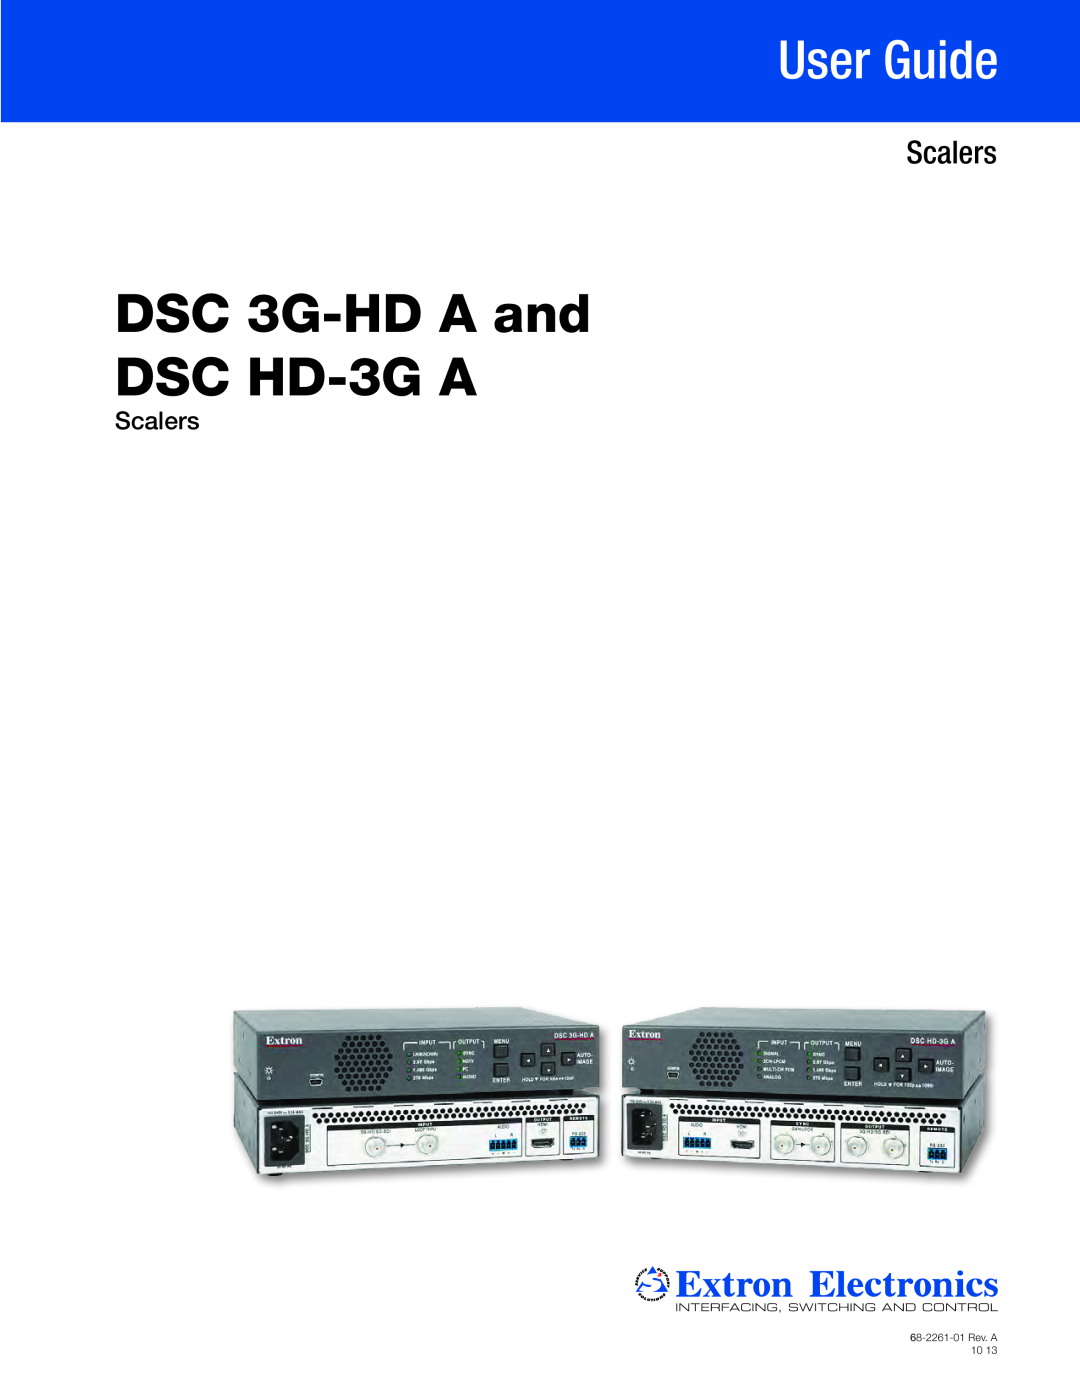 Extron electronic manual DSC 3G-HD A and DSC HD-3G A, User Guide, Scalers 